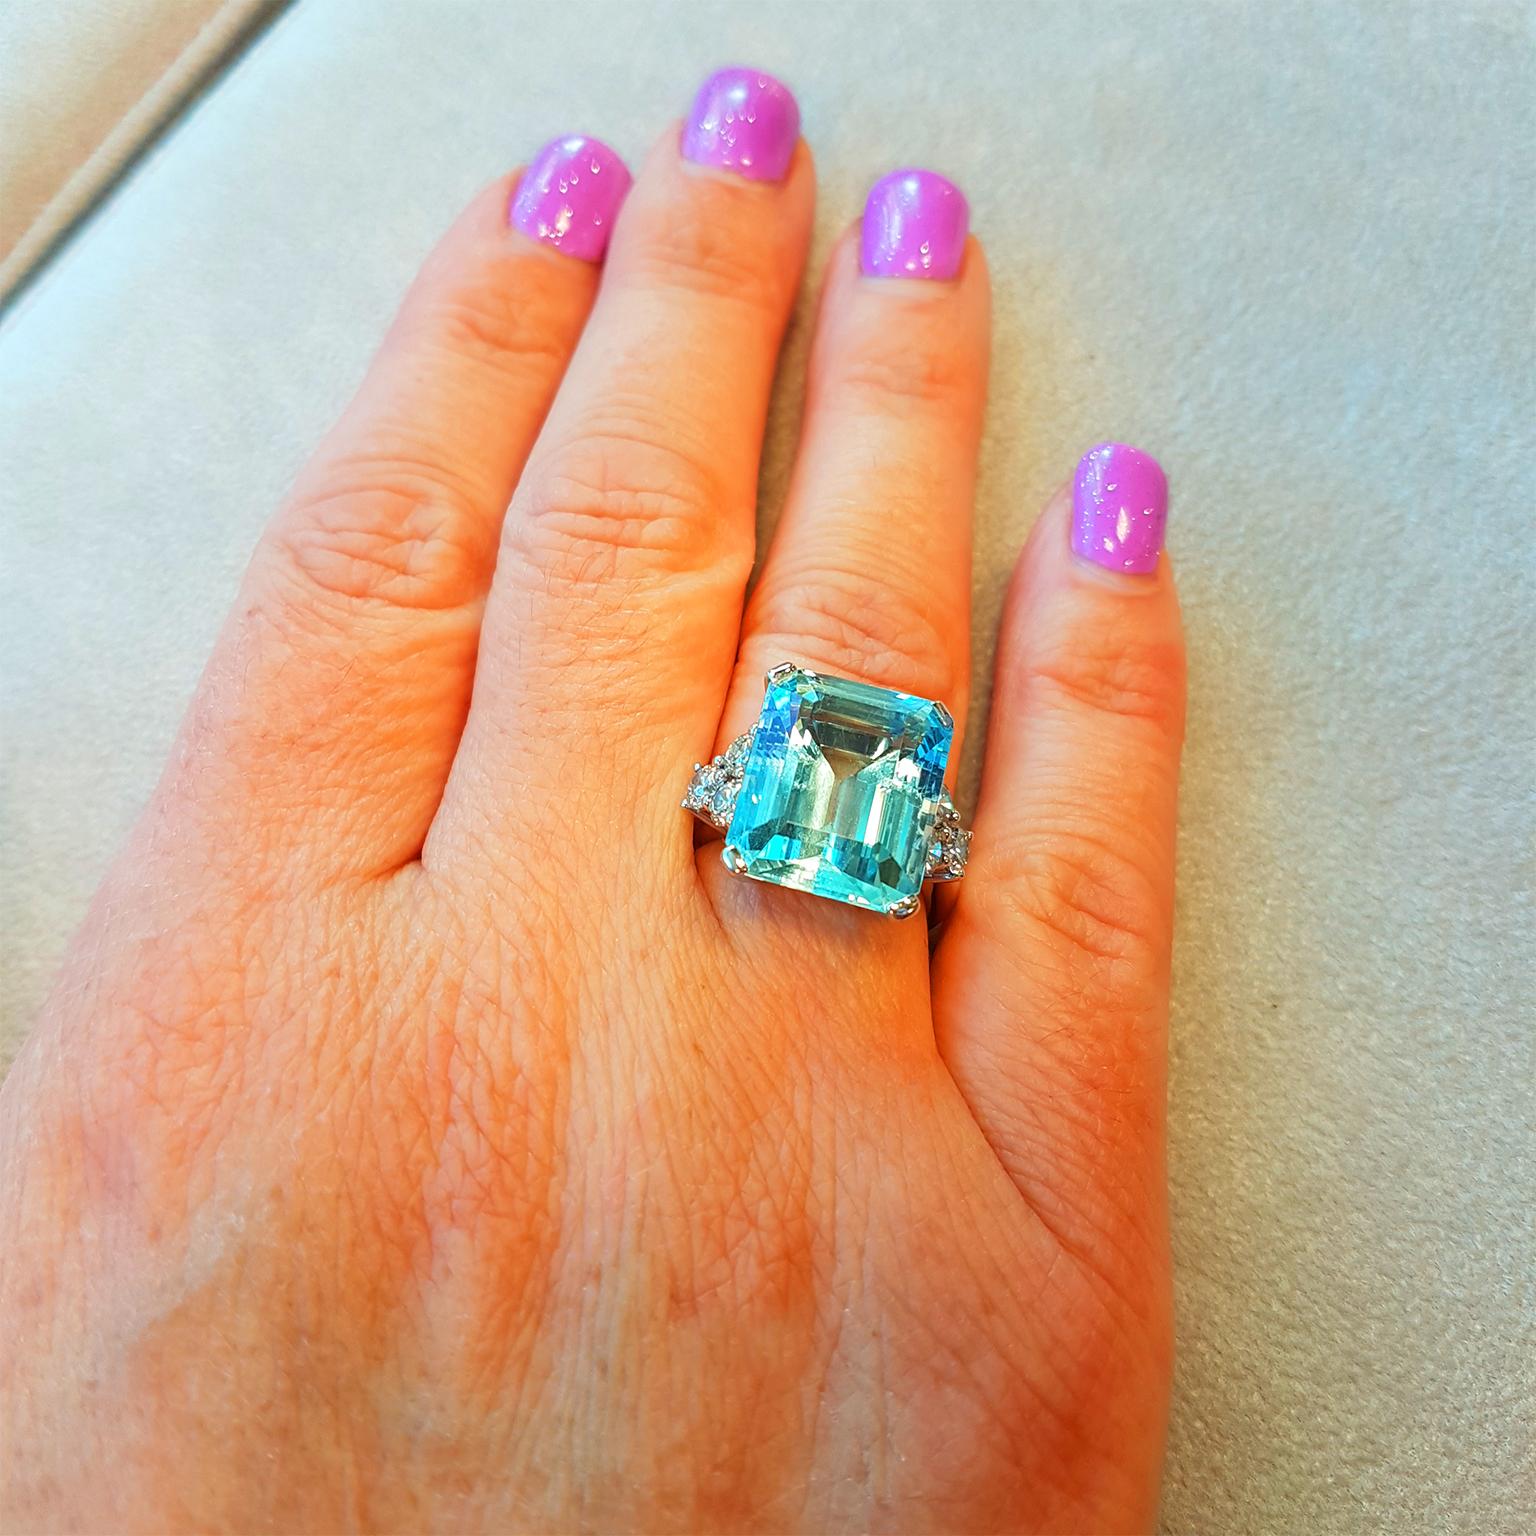 BRAZILIAN BLUE! This magnificent classic cocktail ring has been crafted in 18ct White Gold and set with a trefoil of over a carat of glittering fine white diamonds on each side of a gorgeous emerald-cut Brazilian, sea-water blue Aquamarine 12.55ct.